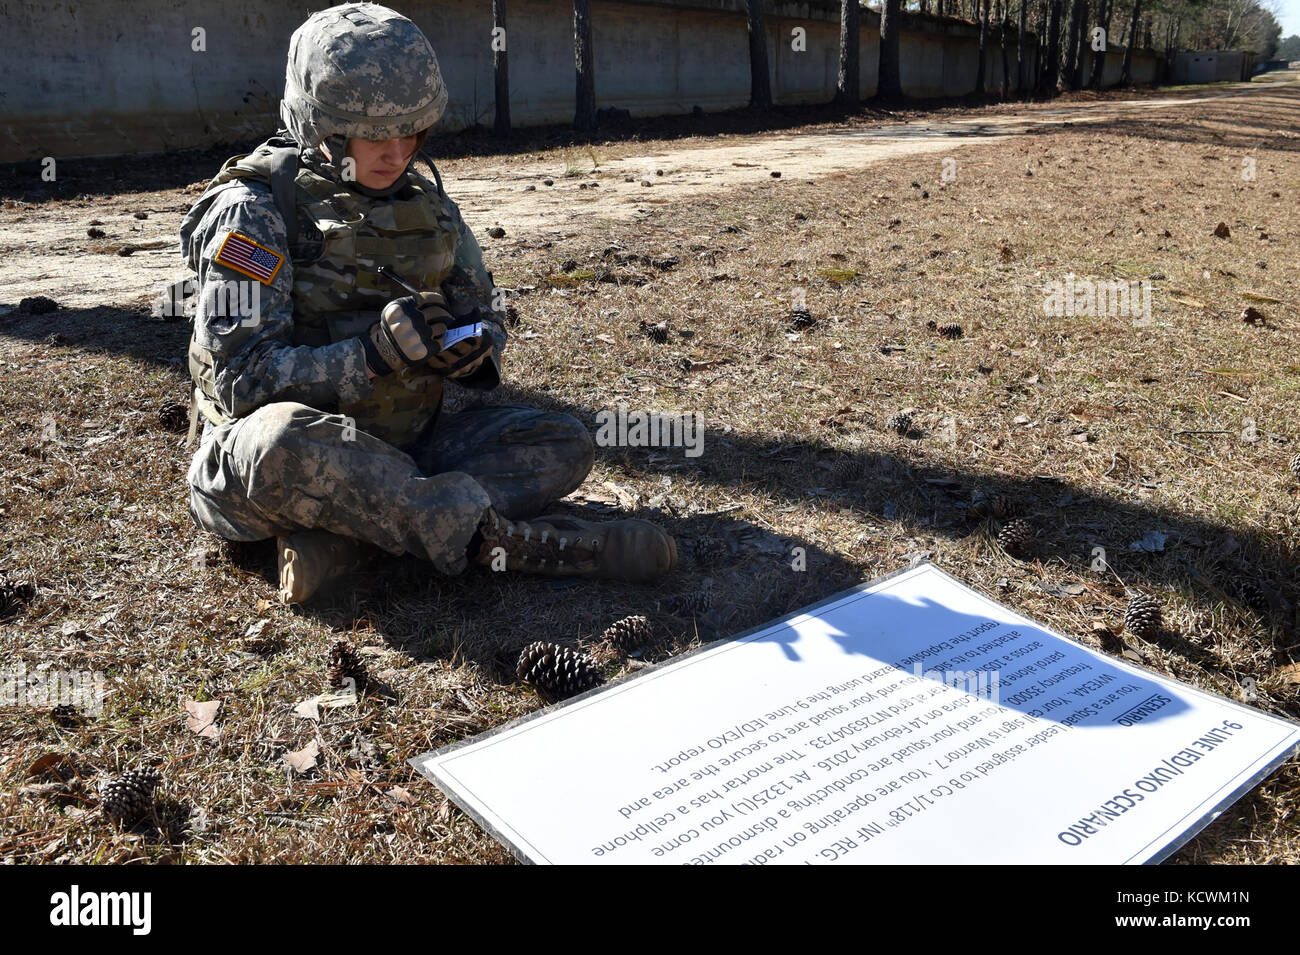 South Carolina Army National Guard Sgt. Rachel Clark, human resources non-commissioned officer with the 218th Leadership Regiment, completes a mystery challenge during the 2017 Best Warrior Competition at McCrady Training Center in Eastover, S.C., Jan 31, 2017. The Battle Challenge is a mobile obstacle course requiring participants to perform nine tasks under pressure of time, including a cargo net climb, a knotted rope descent, wall surmount, ammunition resupply, low crawl, gas can carry, marksmanship tasks, and a service member-down rescue. The event was open to all military service members, Stock Photo